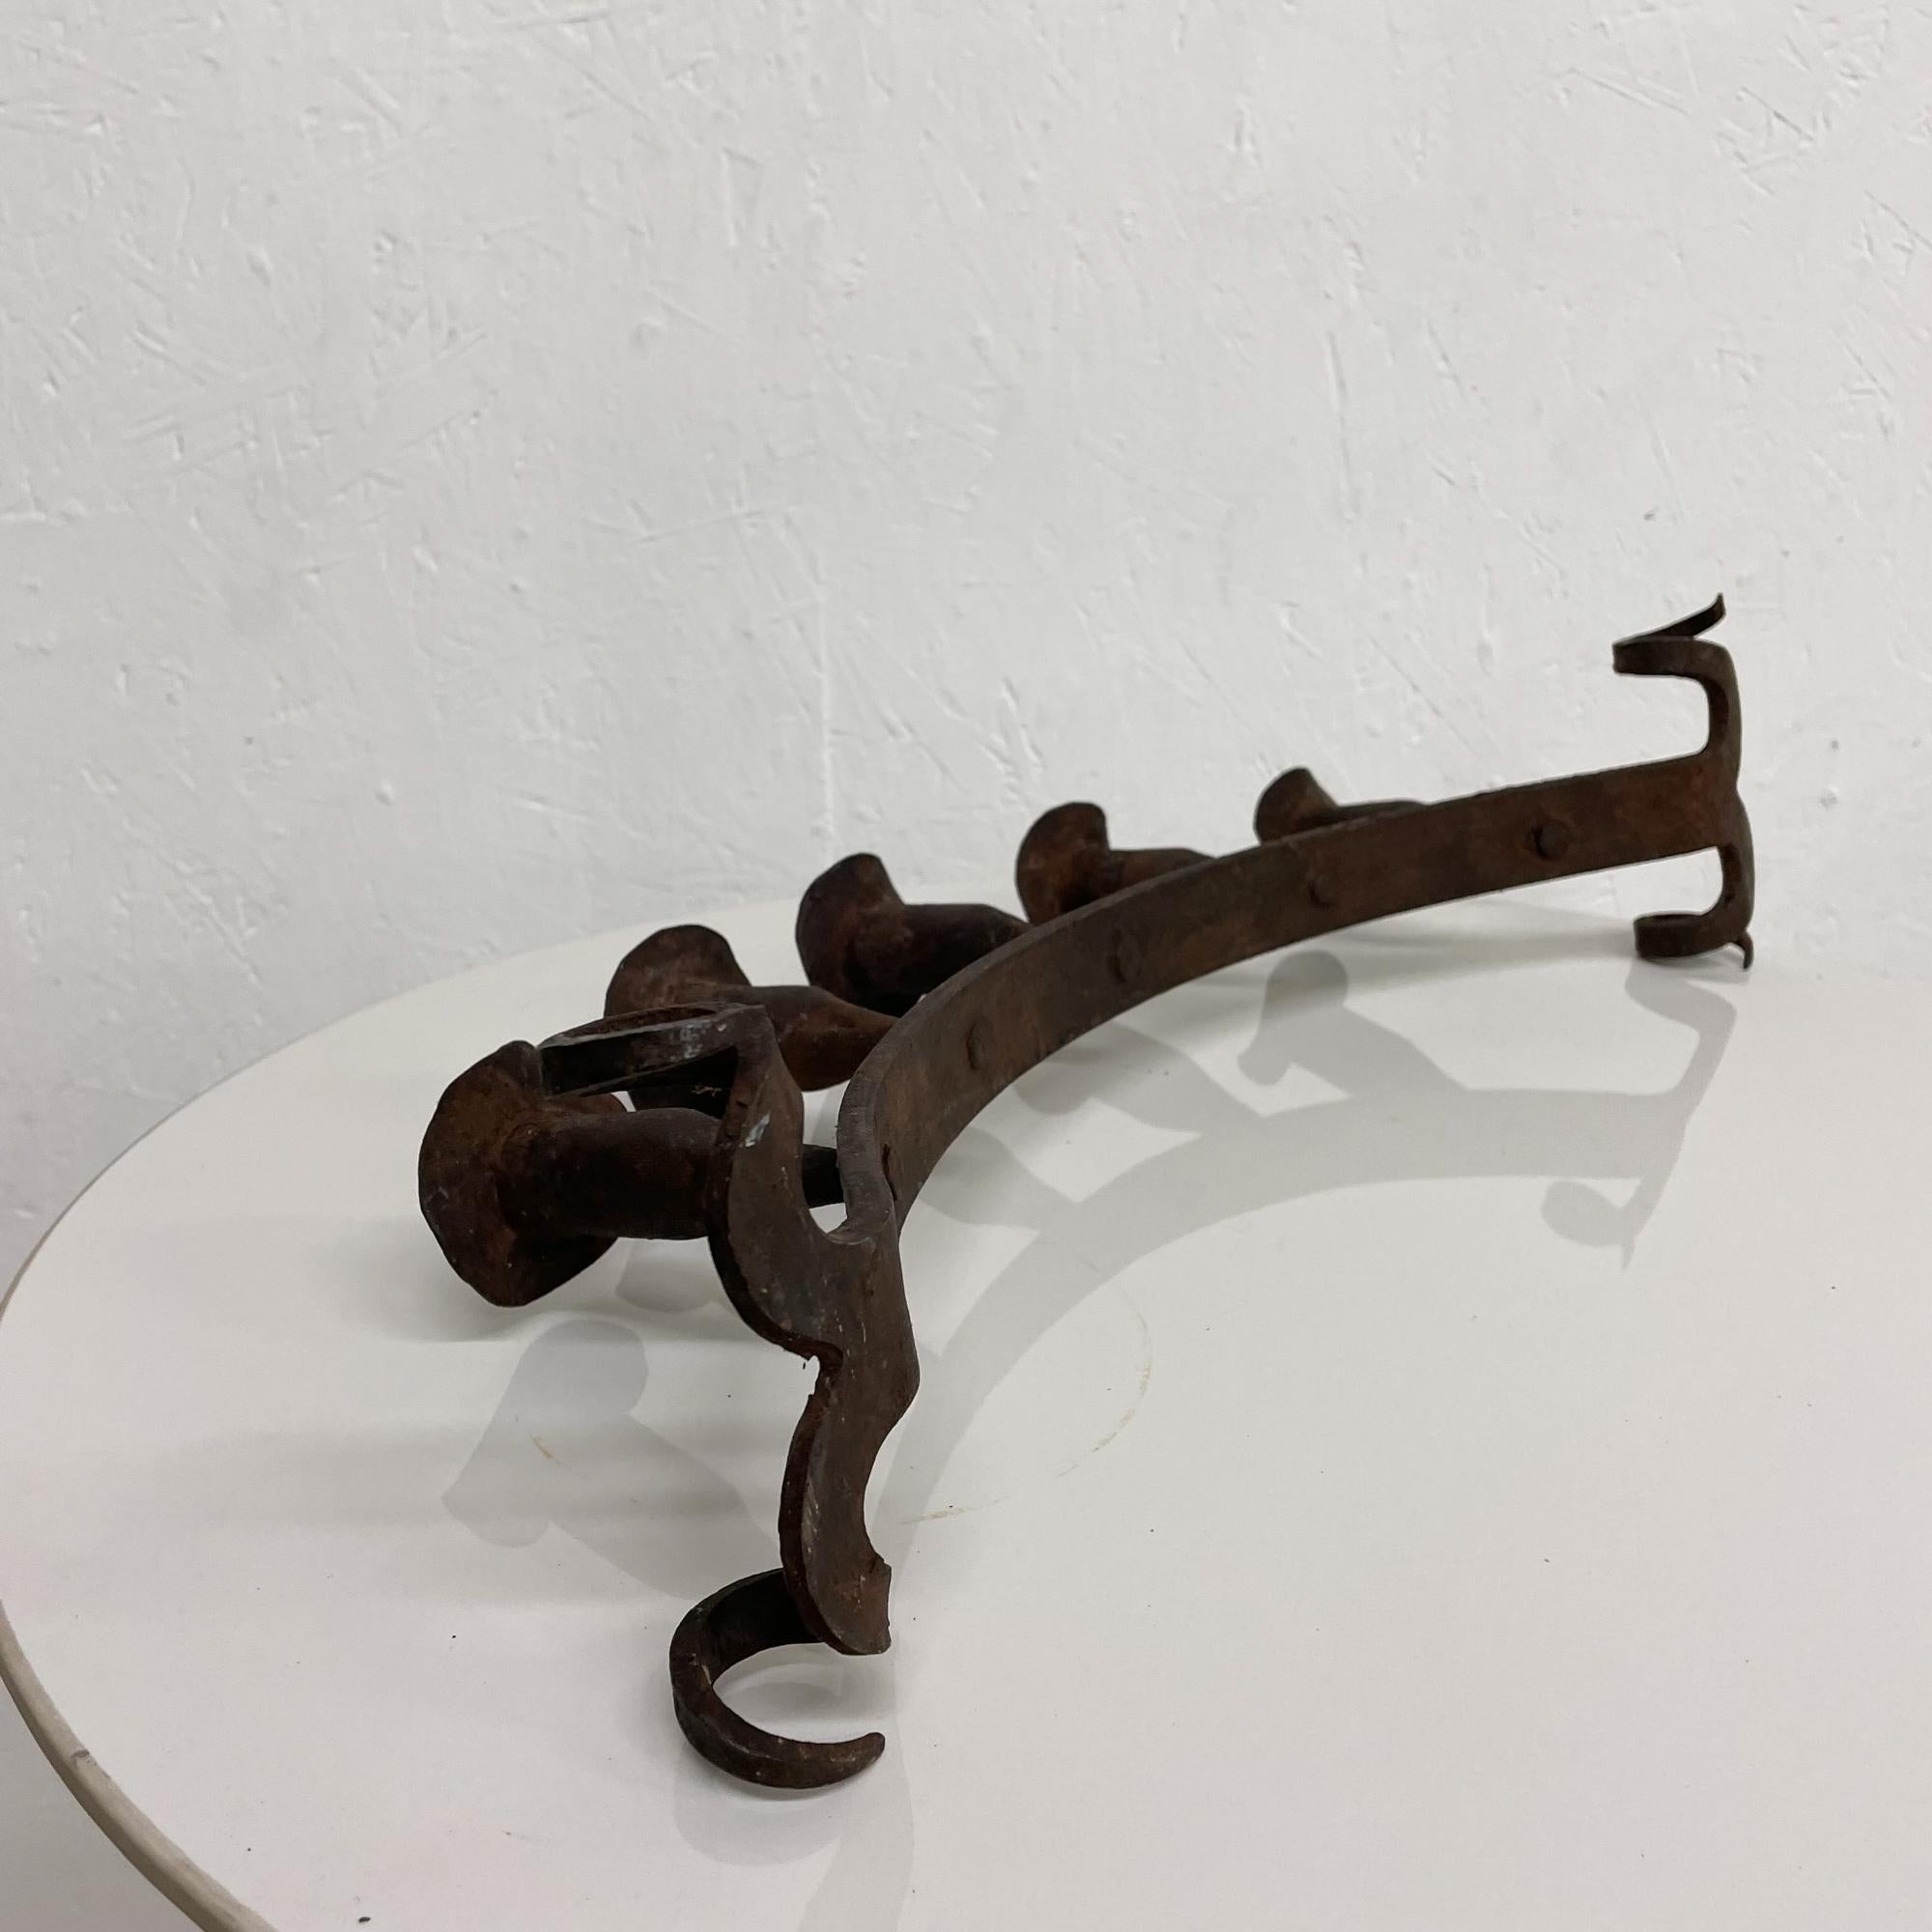 Antique Candle Holder Spanish Colonial 5 Arm Candelabra Candle Holder Rustic Scroll 
Forged Patinated Metal Iron
20.5 W x 7.5 Tall x 4.63 D inches
Unmarked
Antique Condition Vintage with Patina present Unrestored.
See our images provided. 


